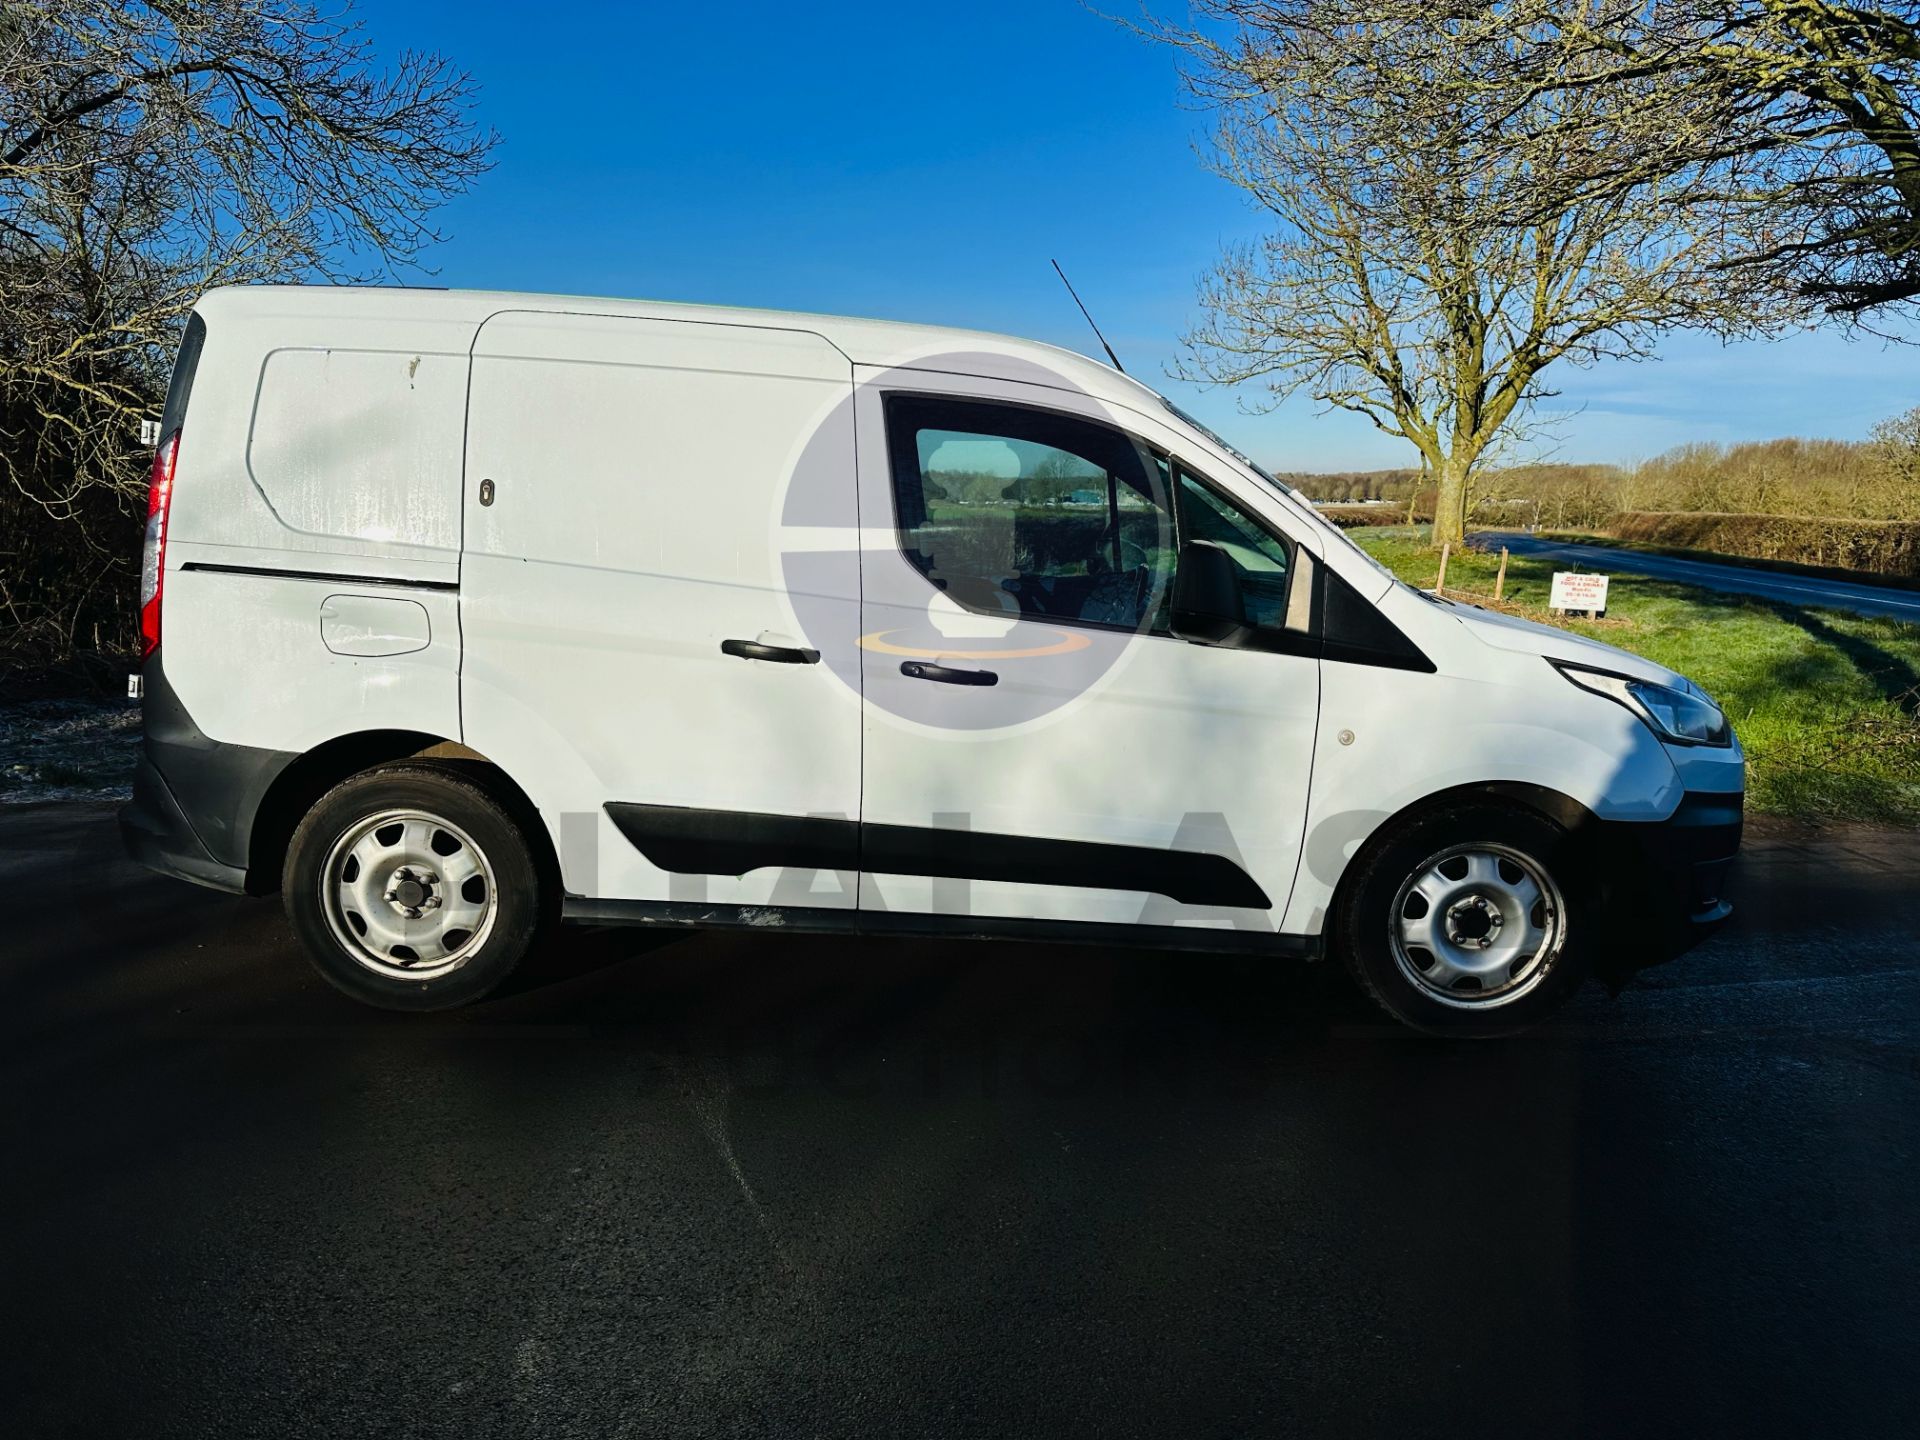 FORD TRANSIT CONNECT 1.5TDCI - 5 SEATER CREW VAN - 2019 MODEL - 1 OWNER FROM NEW - ULEZ COMPLIANT! - Image 11 of 32